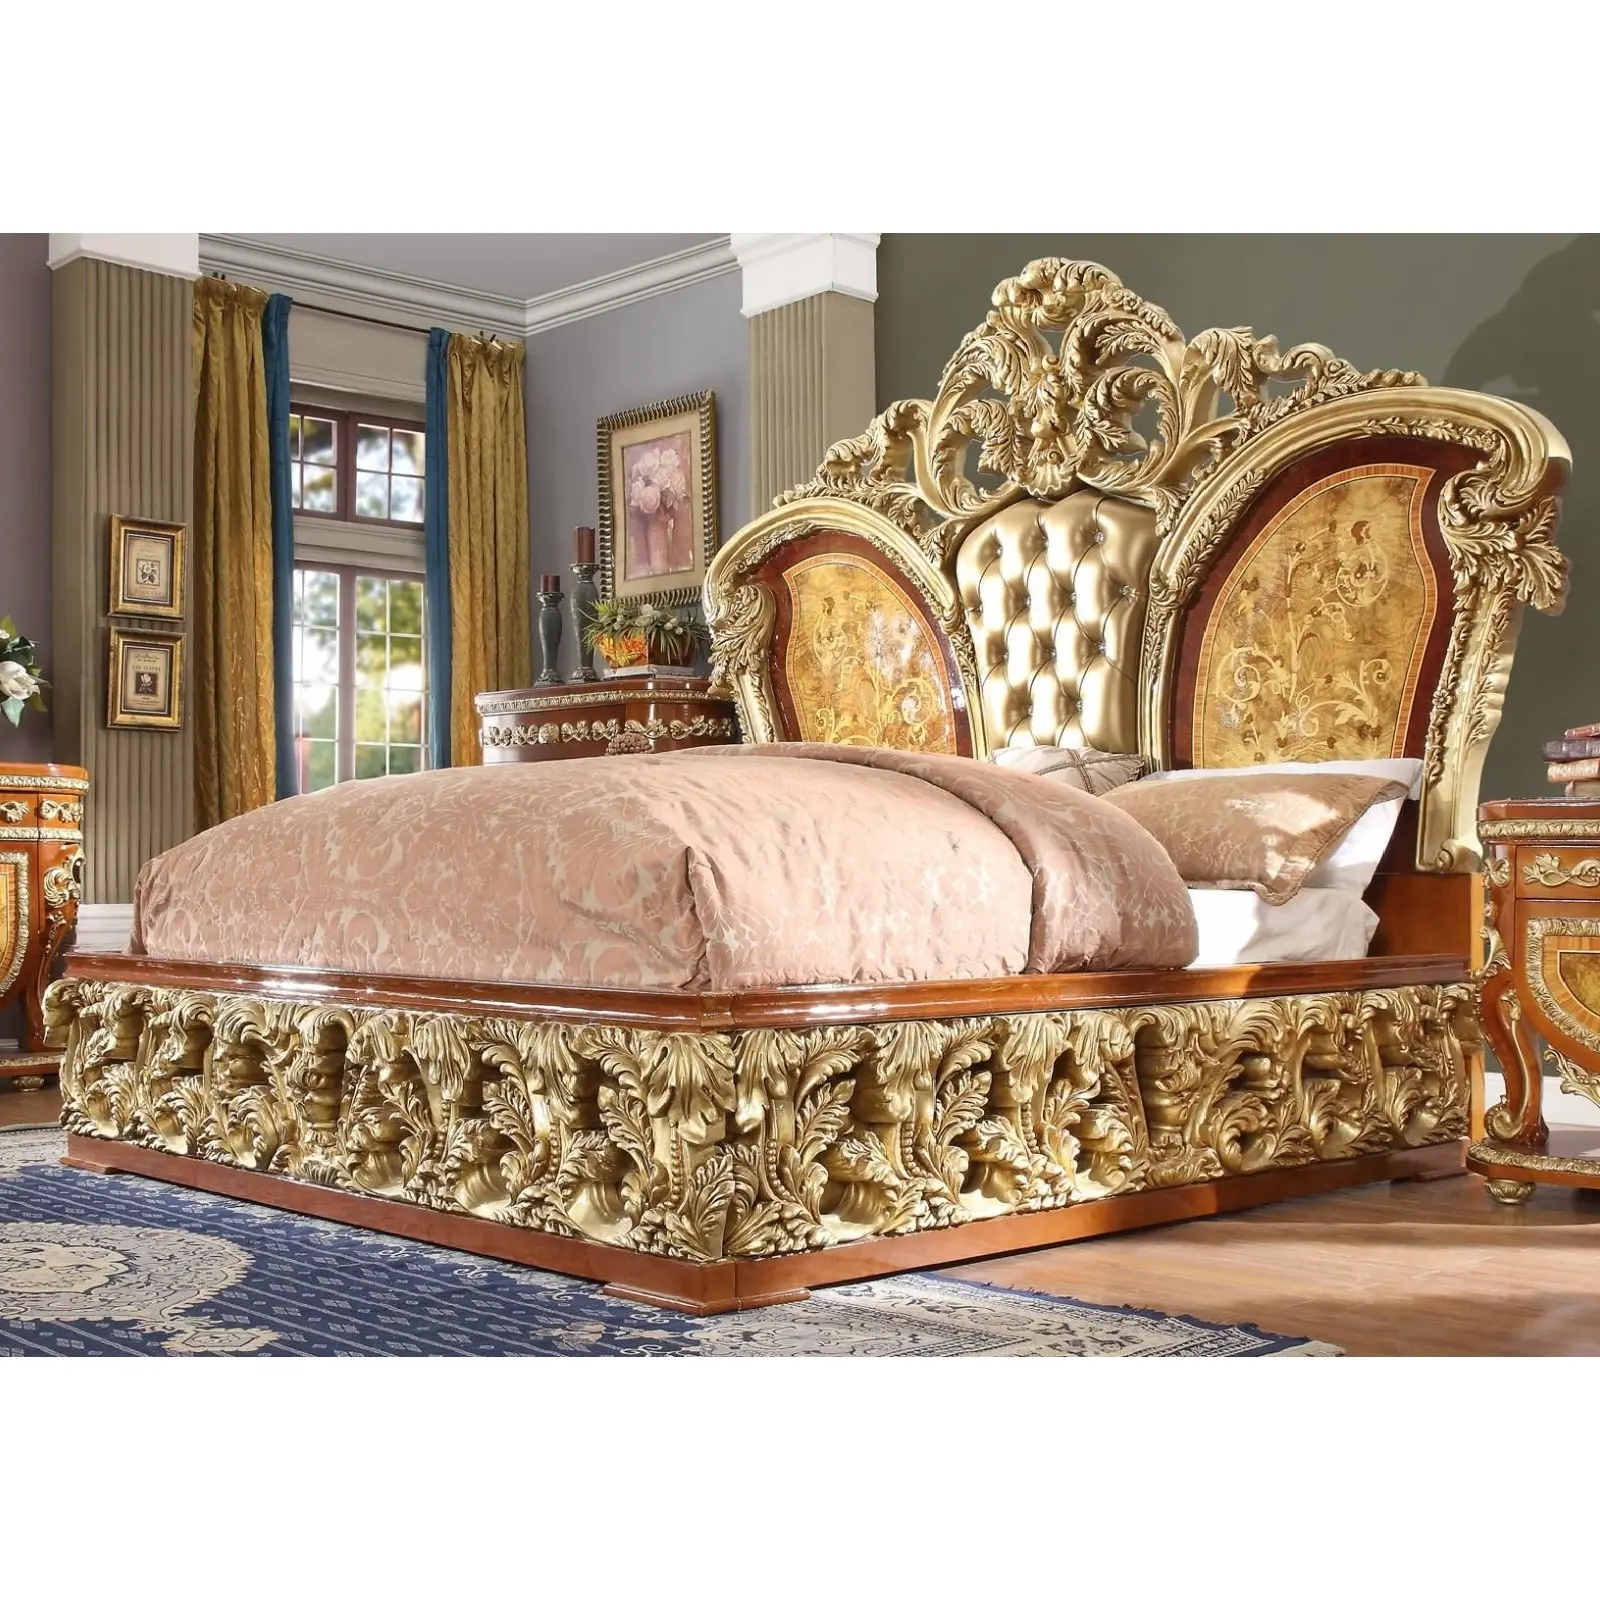 Luxury European Style Classic Wooden Bedroom Furniture Set Wooden Craft Queen Size Bedroom Set Affordable King Size Hand Carved